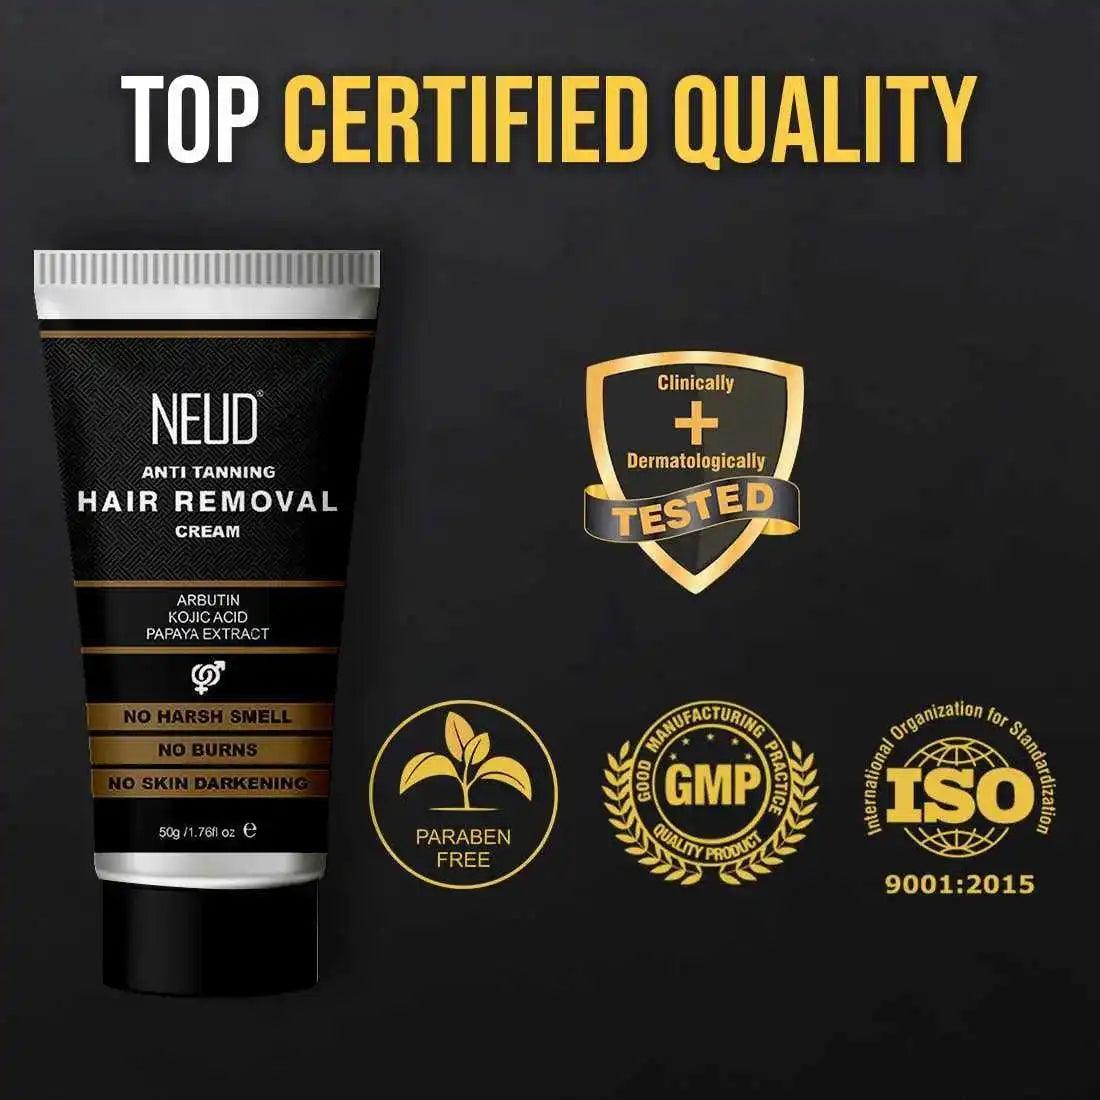 NEUD Anti-Tanning Hair Removal Cream for Arms, Legs, Chest and Back is Paraben Free Top Certified Quality Product - everteen-neud.com